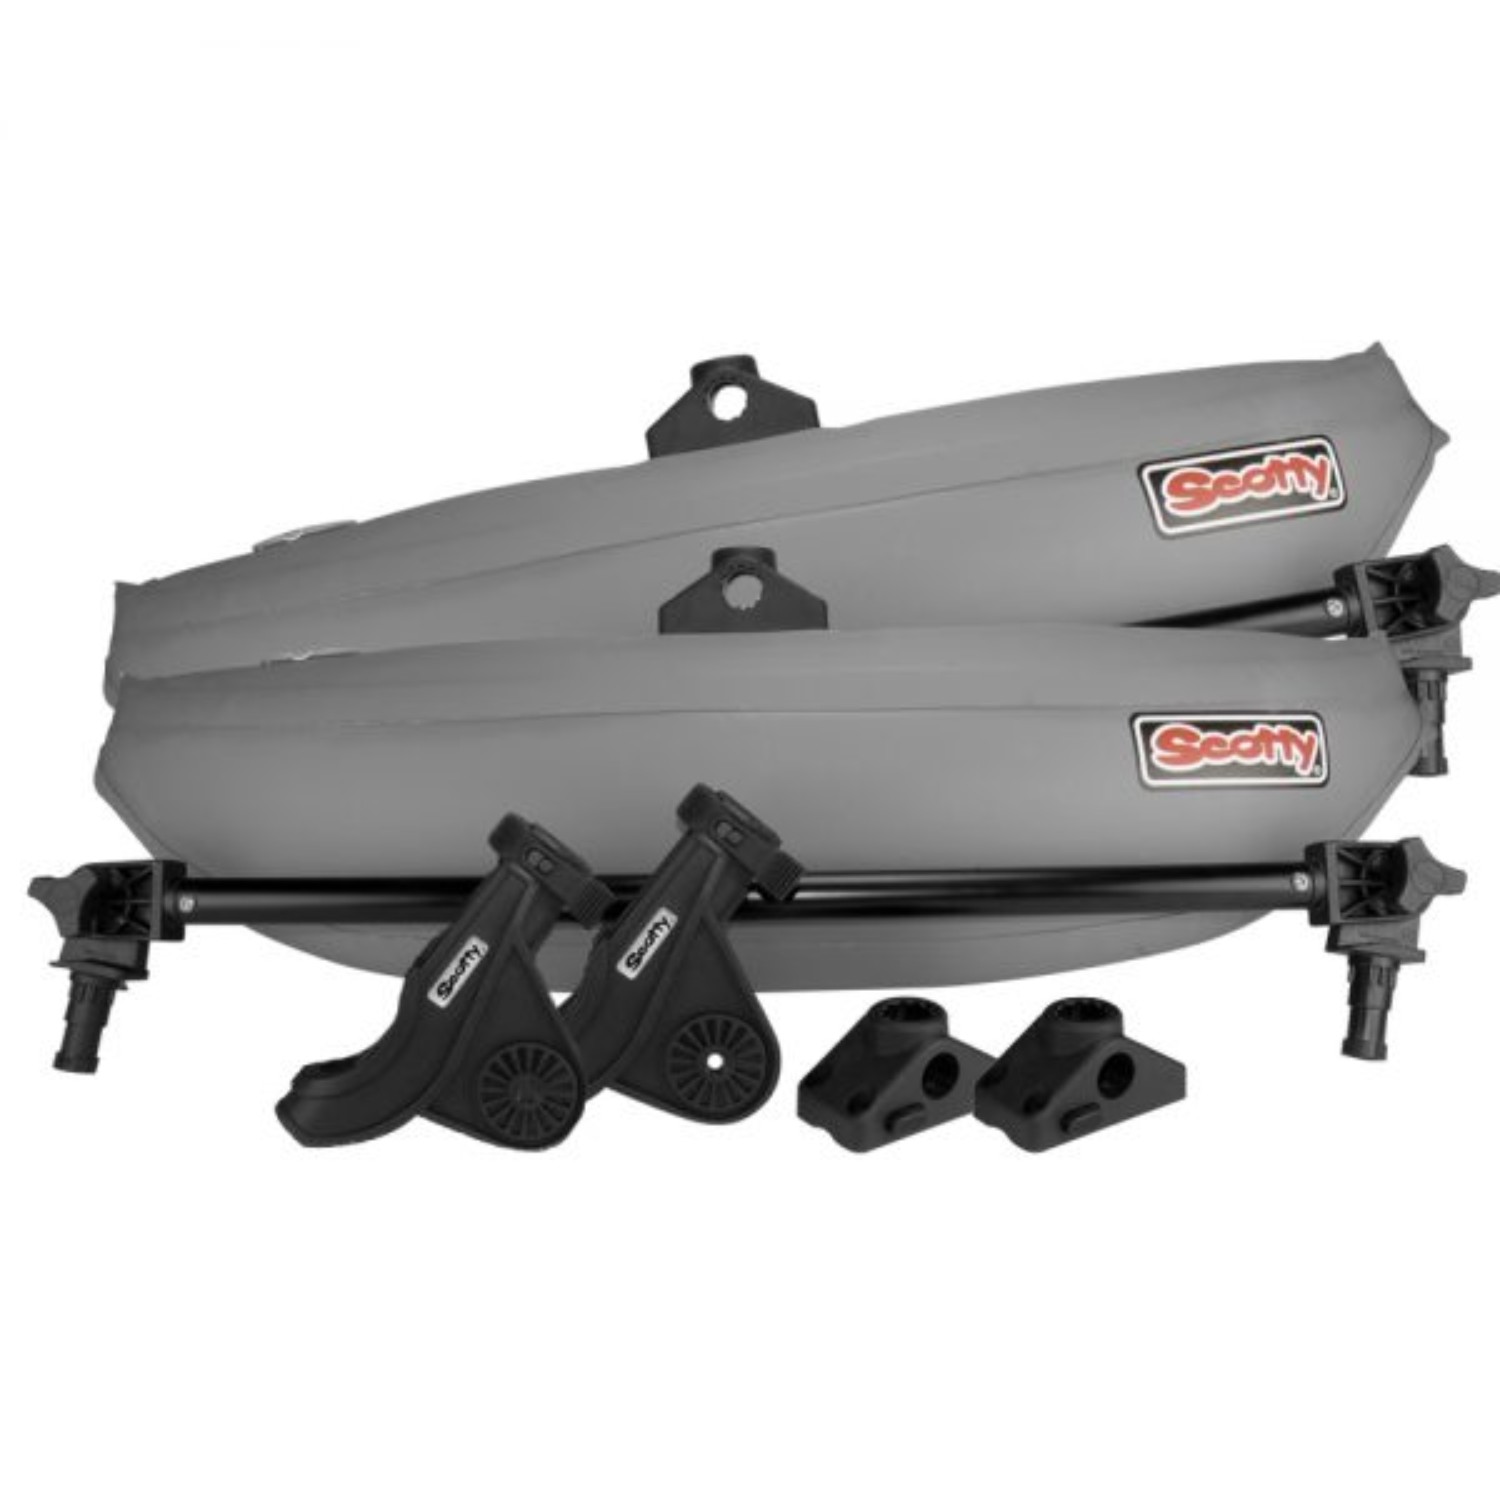 Scotty 302 Kayak Stabilizer System 0302 , 36% Off with Free S&H